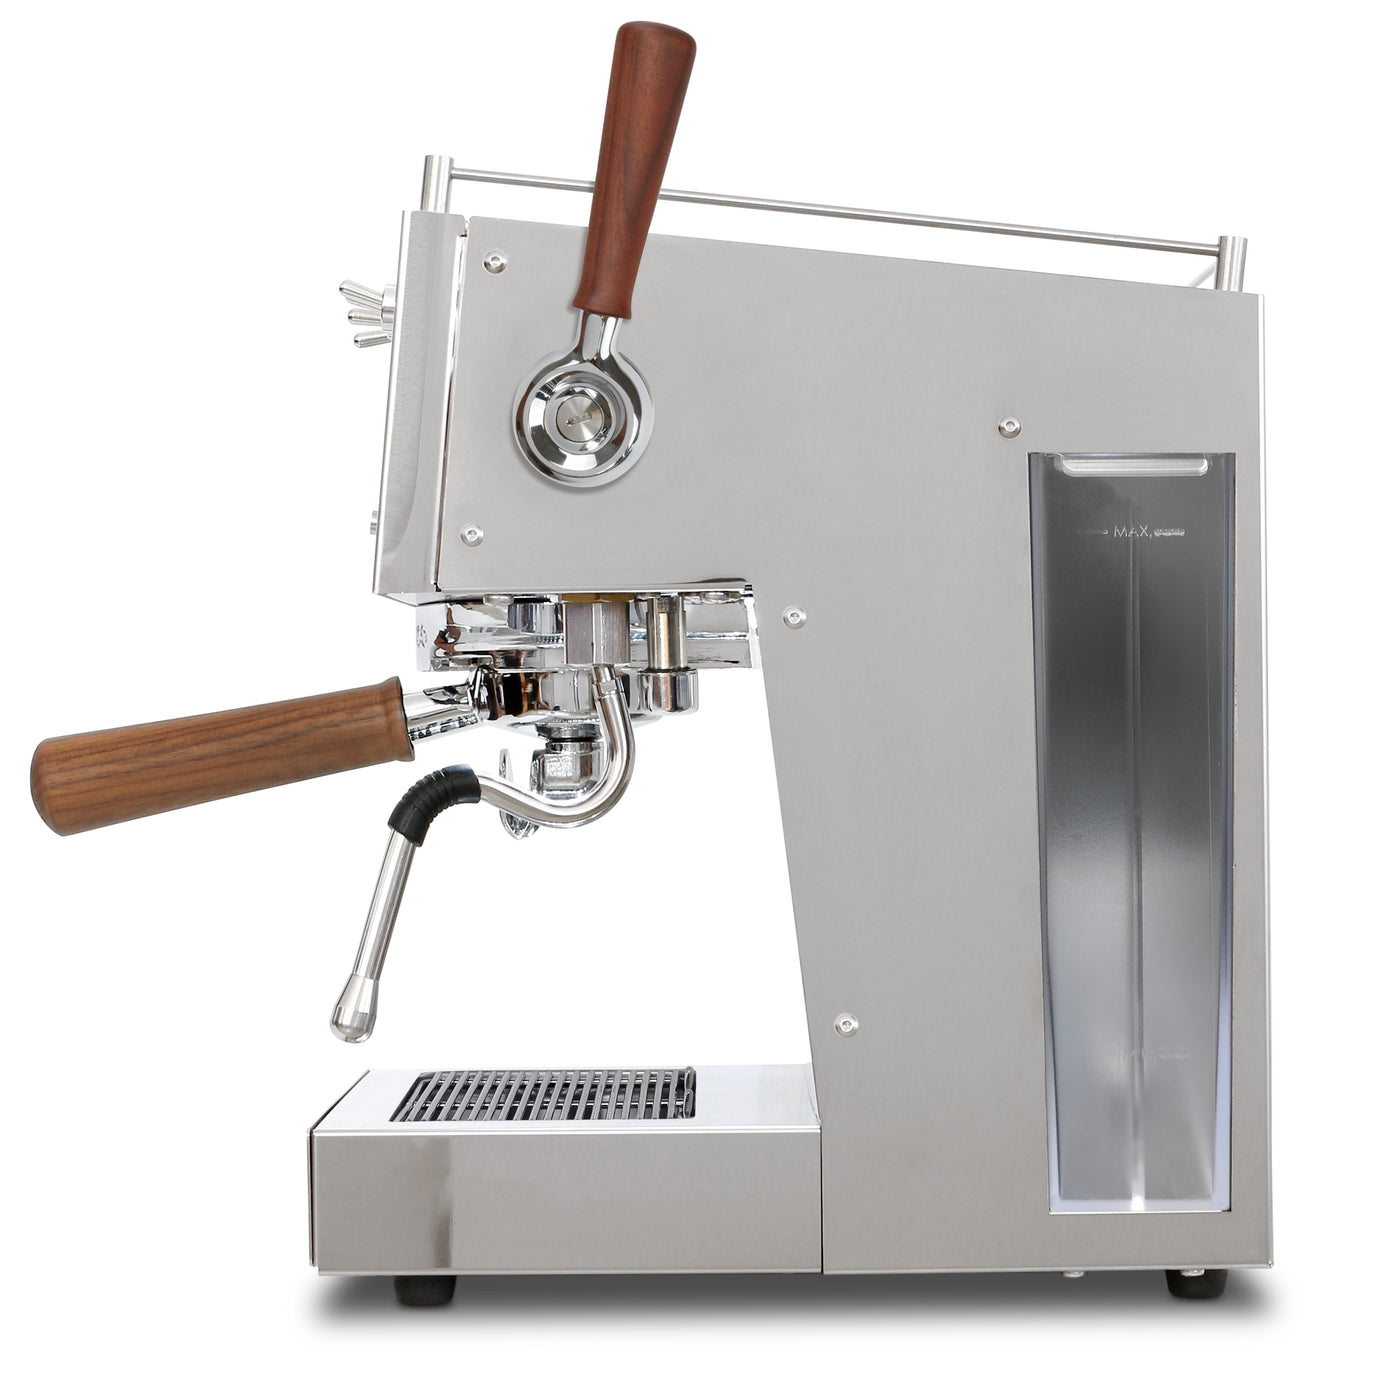 Ascaso Steel Duo Plus in Stainless Steel and Walnut wood - view from the right hand side of the Espresso machine